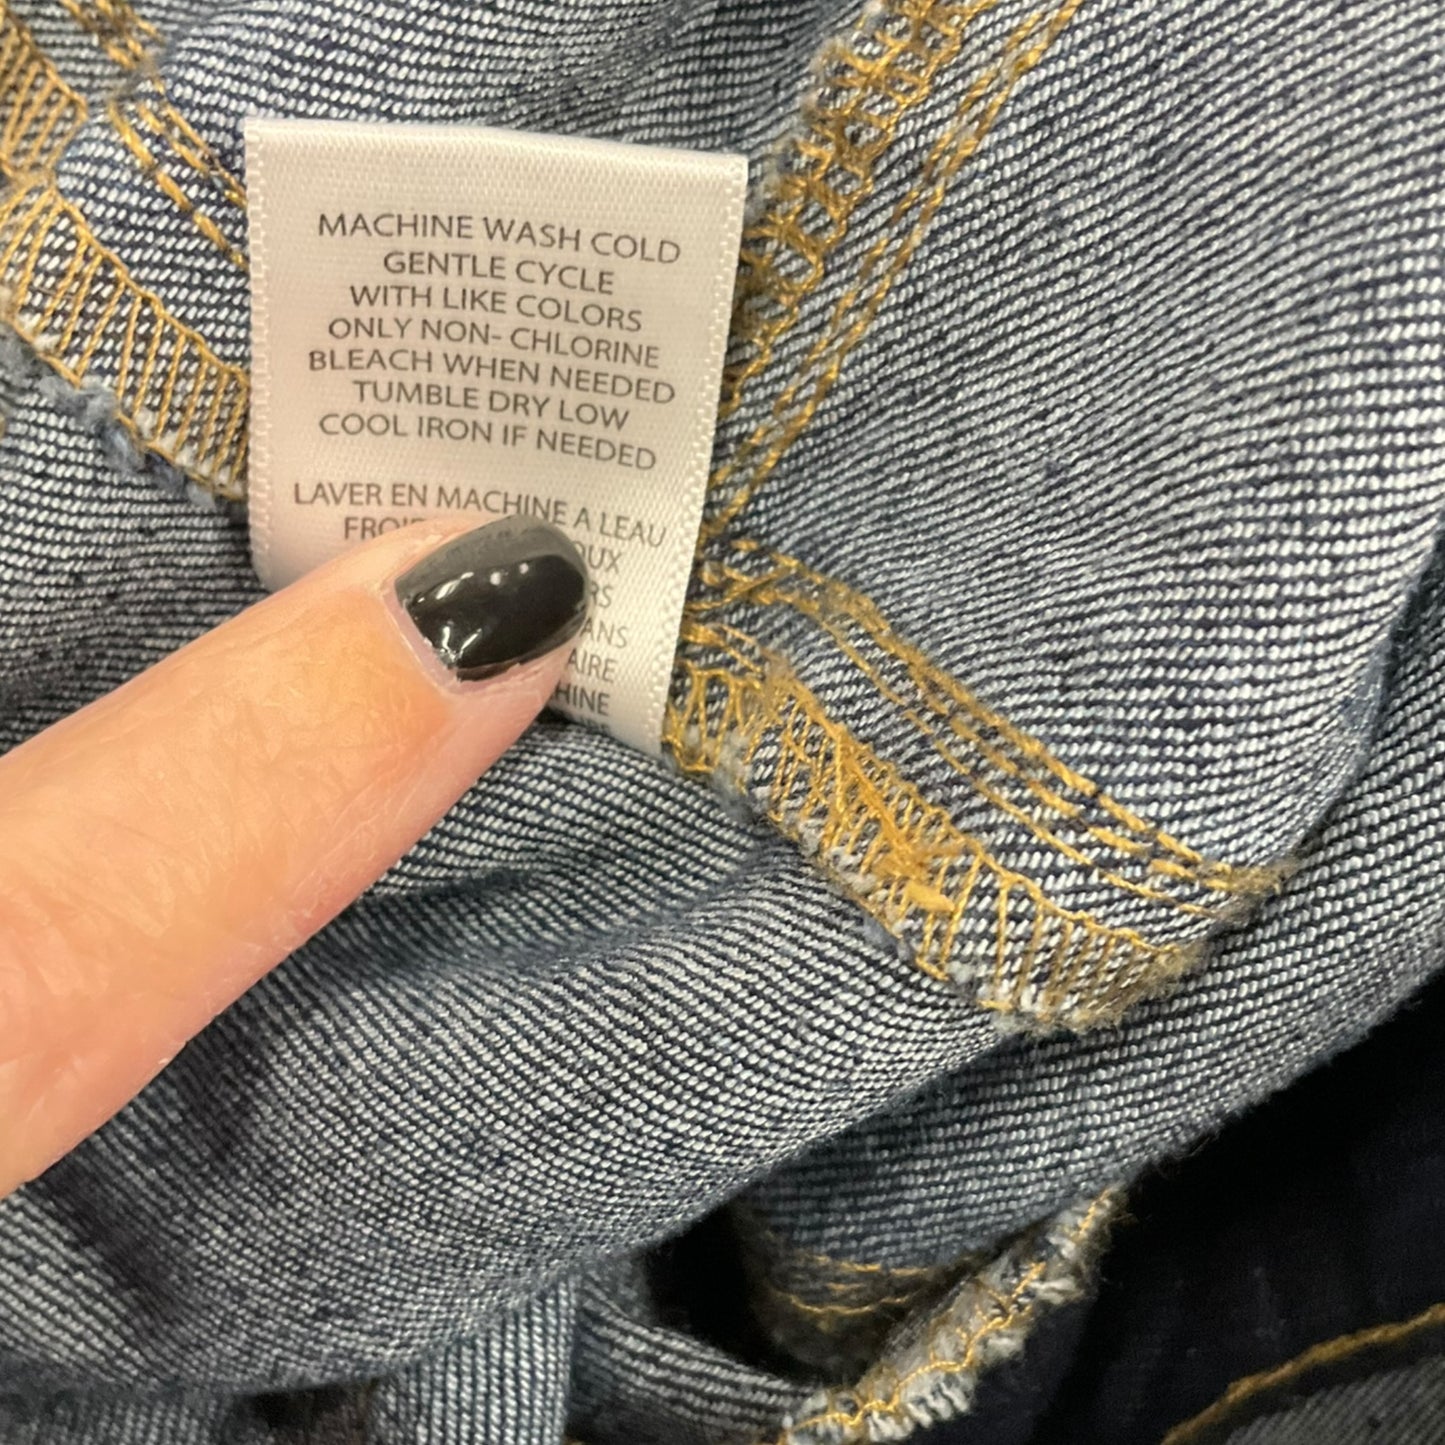 Jeans Relaxed/boyfriend By Clothes Mentor  Size: 22